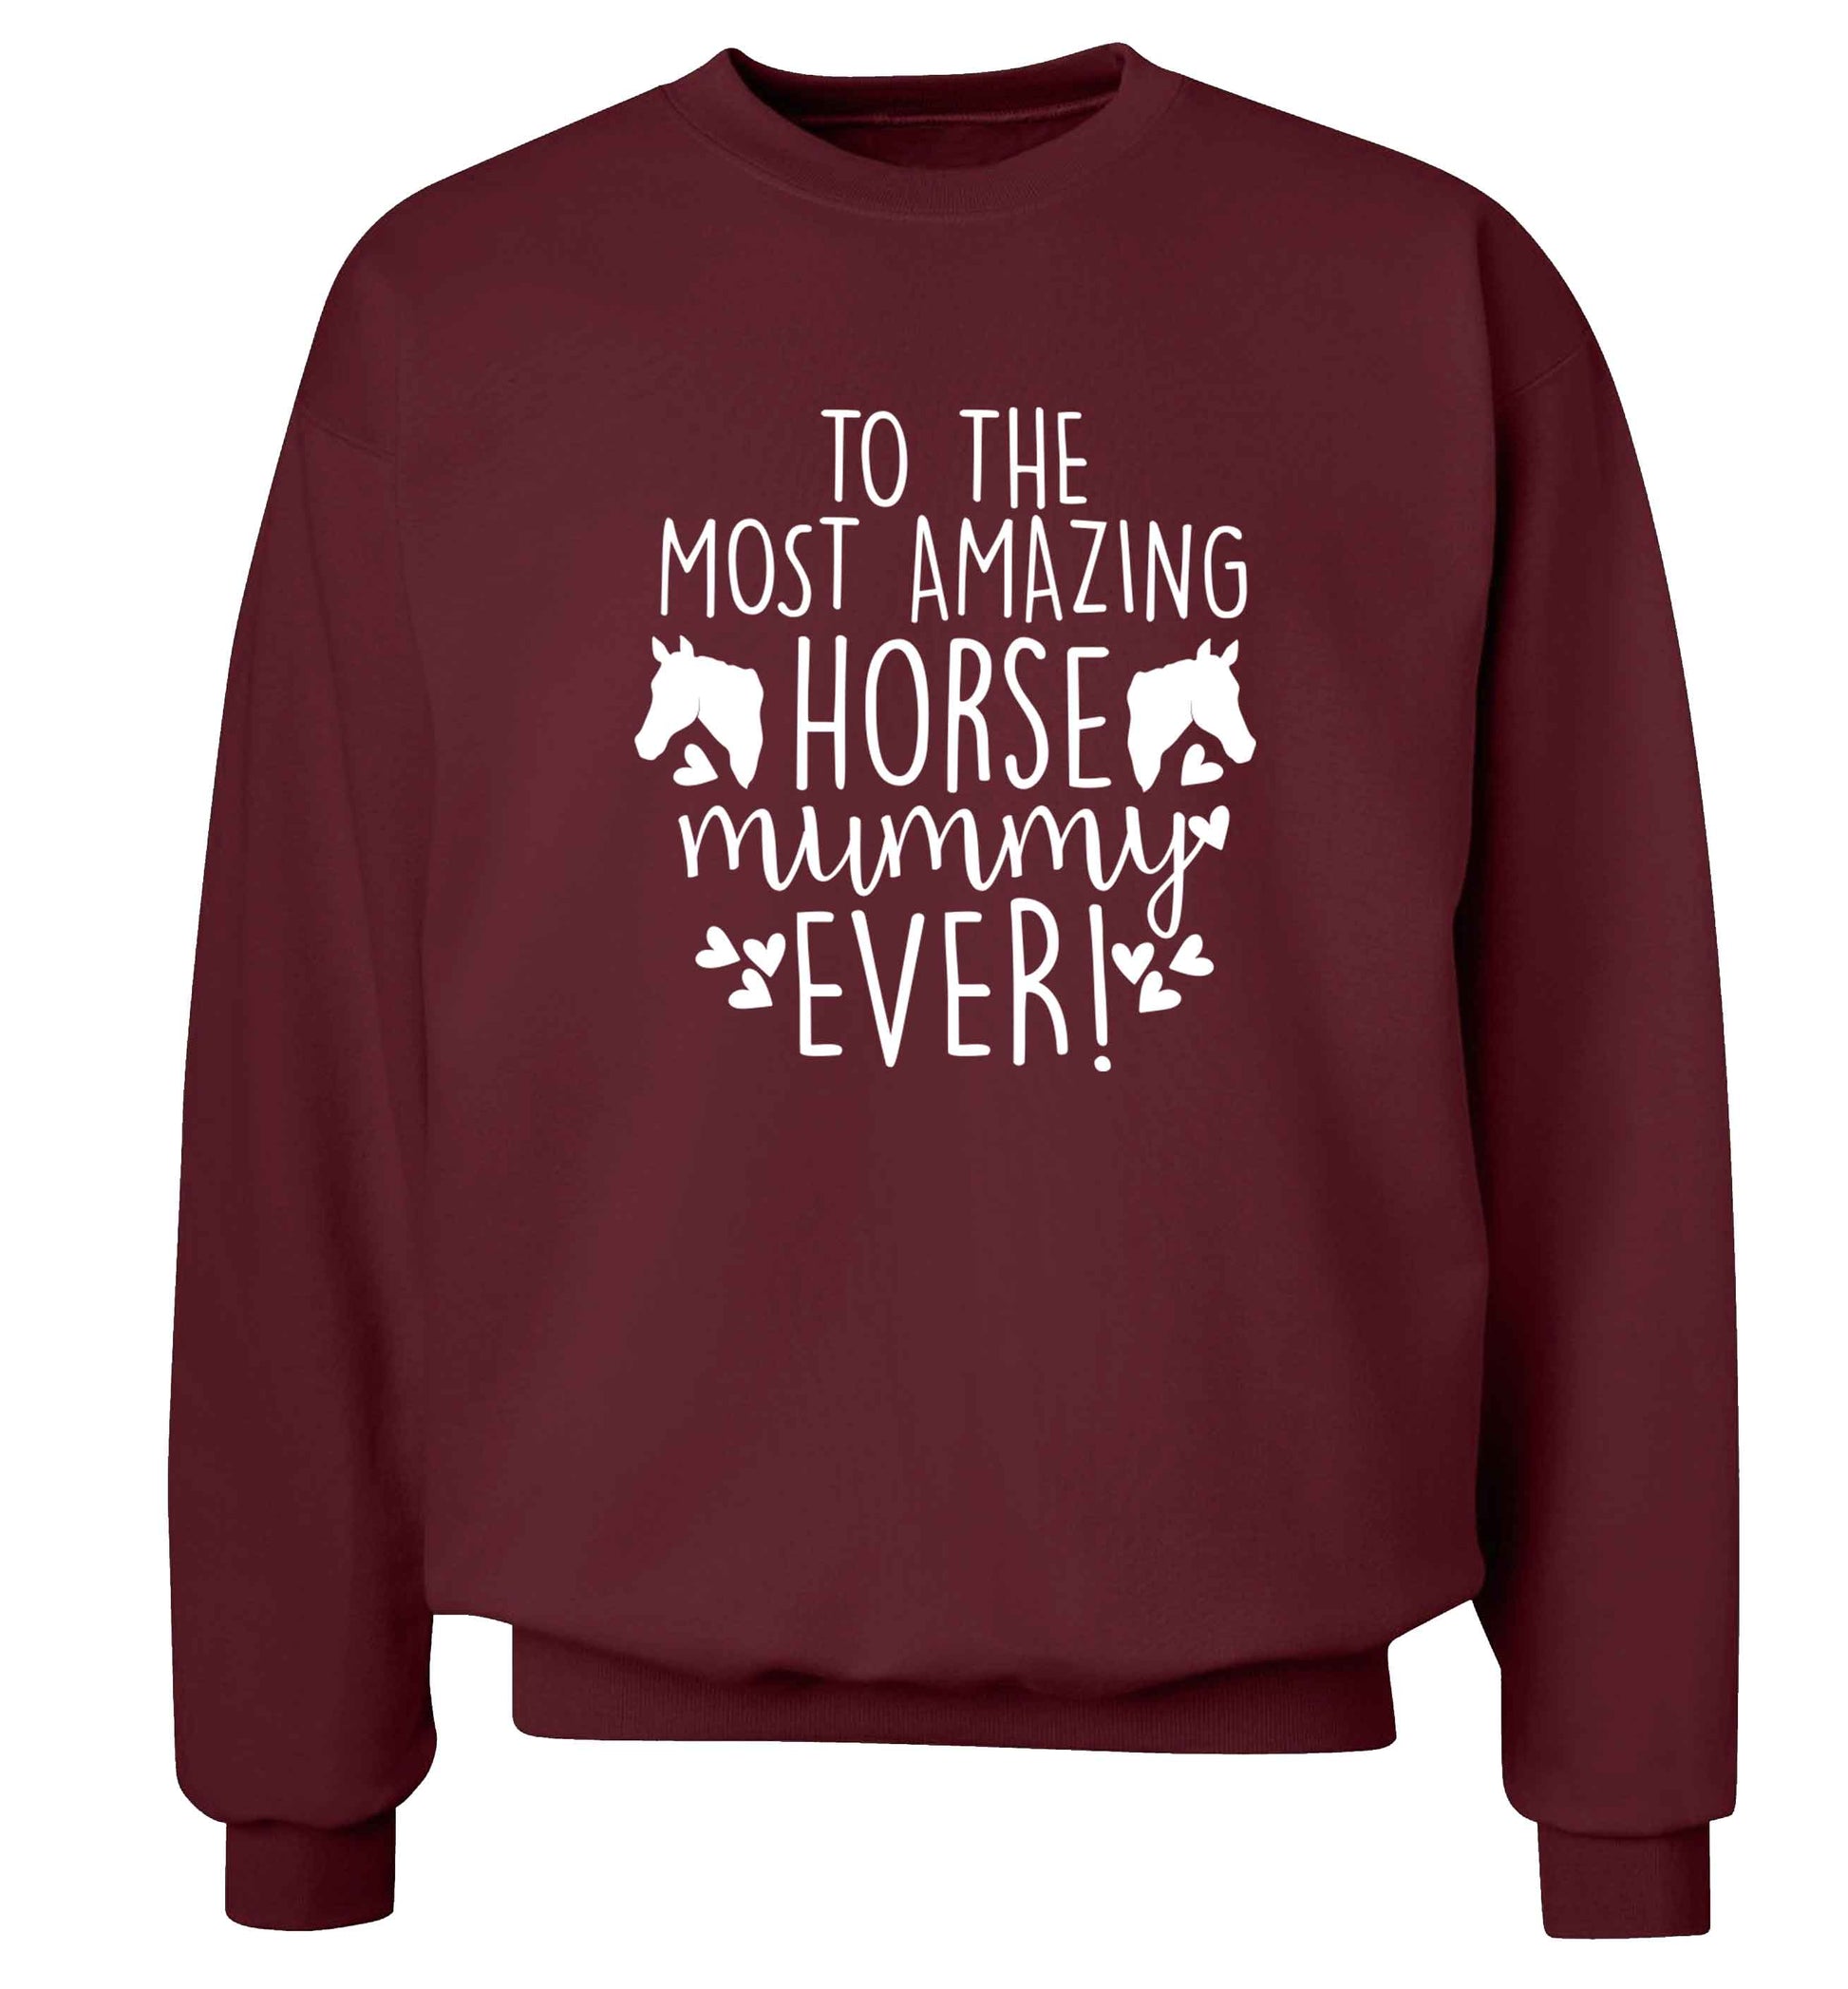 To the most amazing horse mummy ever! adult's unisex maroon sweater 2XL